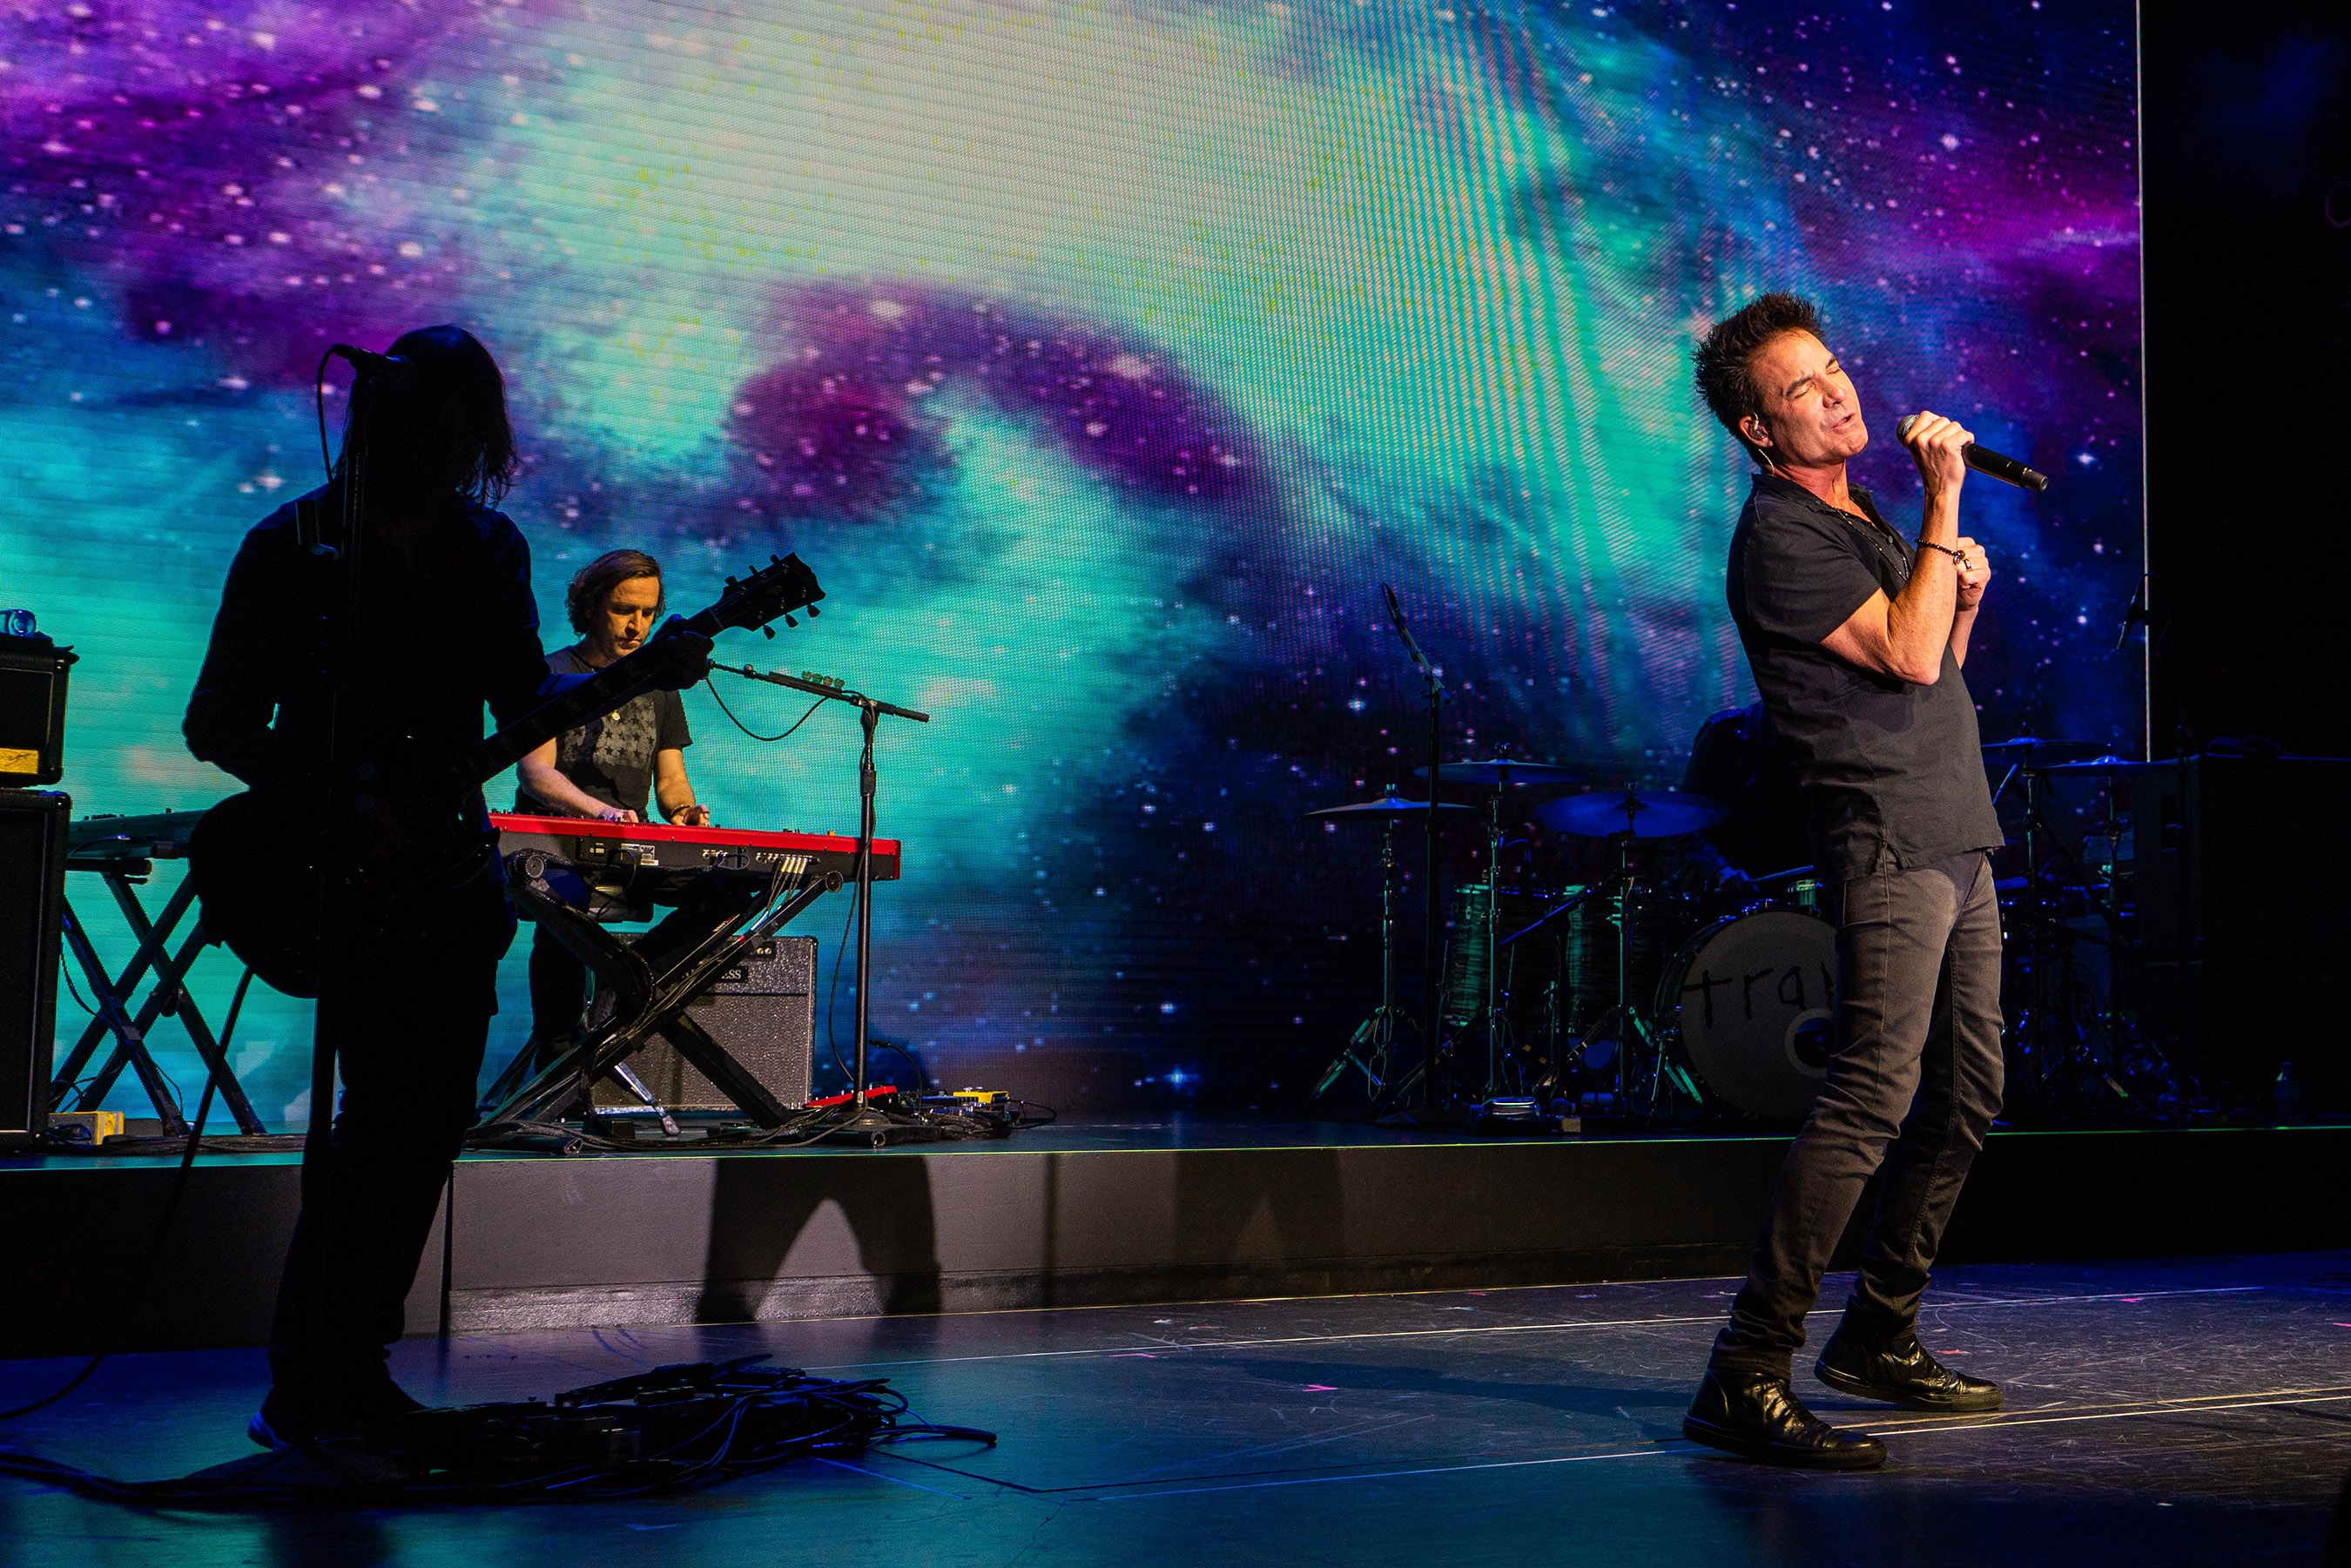 Three-time Grammy® award-winning rock band, Train, performs at Norwegian Bliss christening event on board in Seattle, Washington.